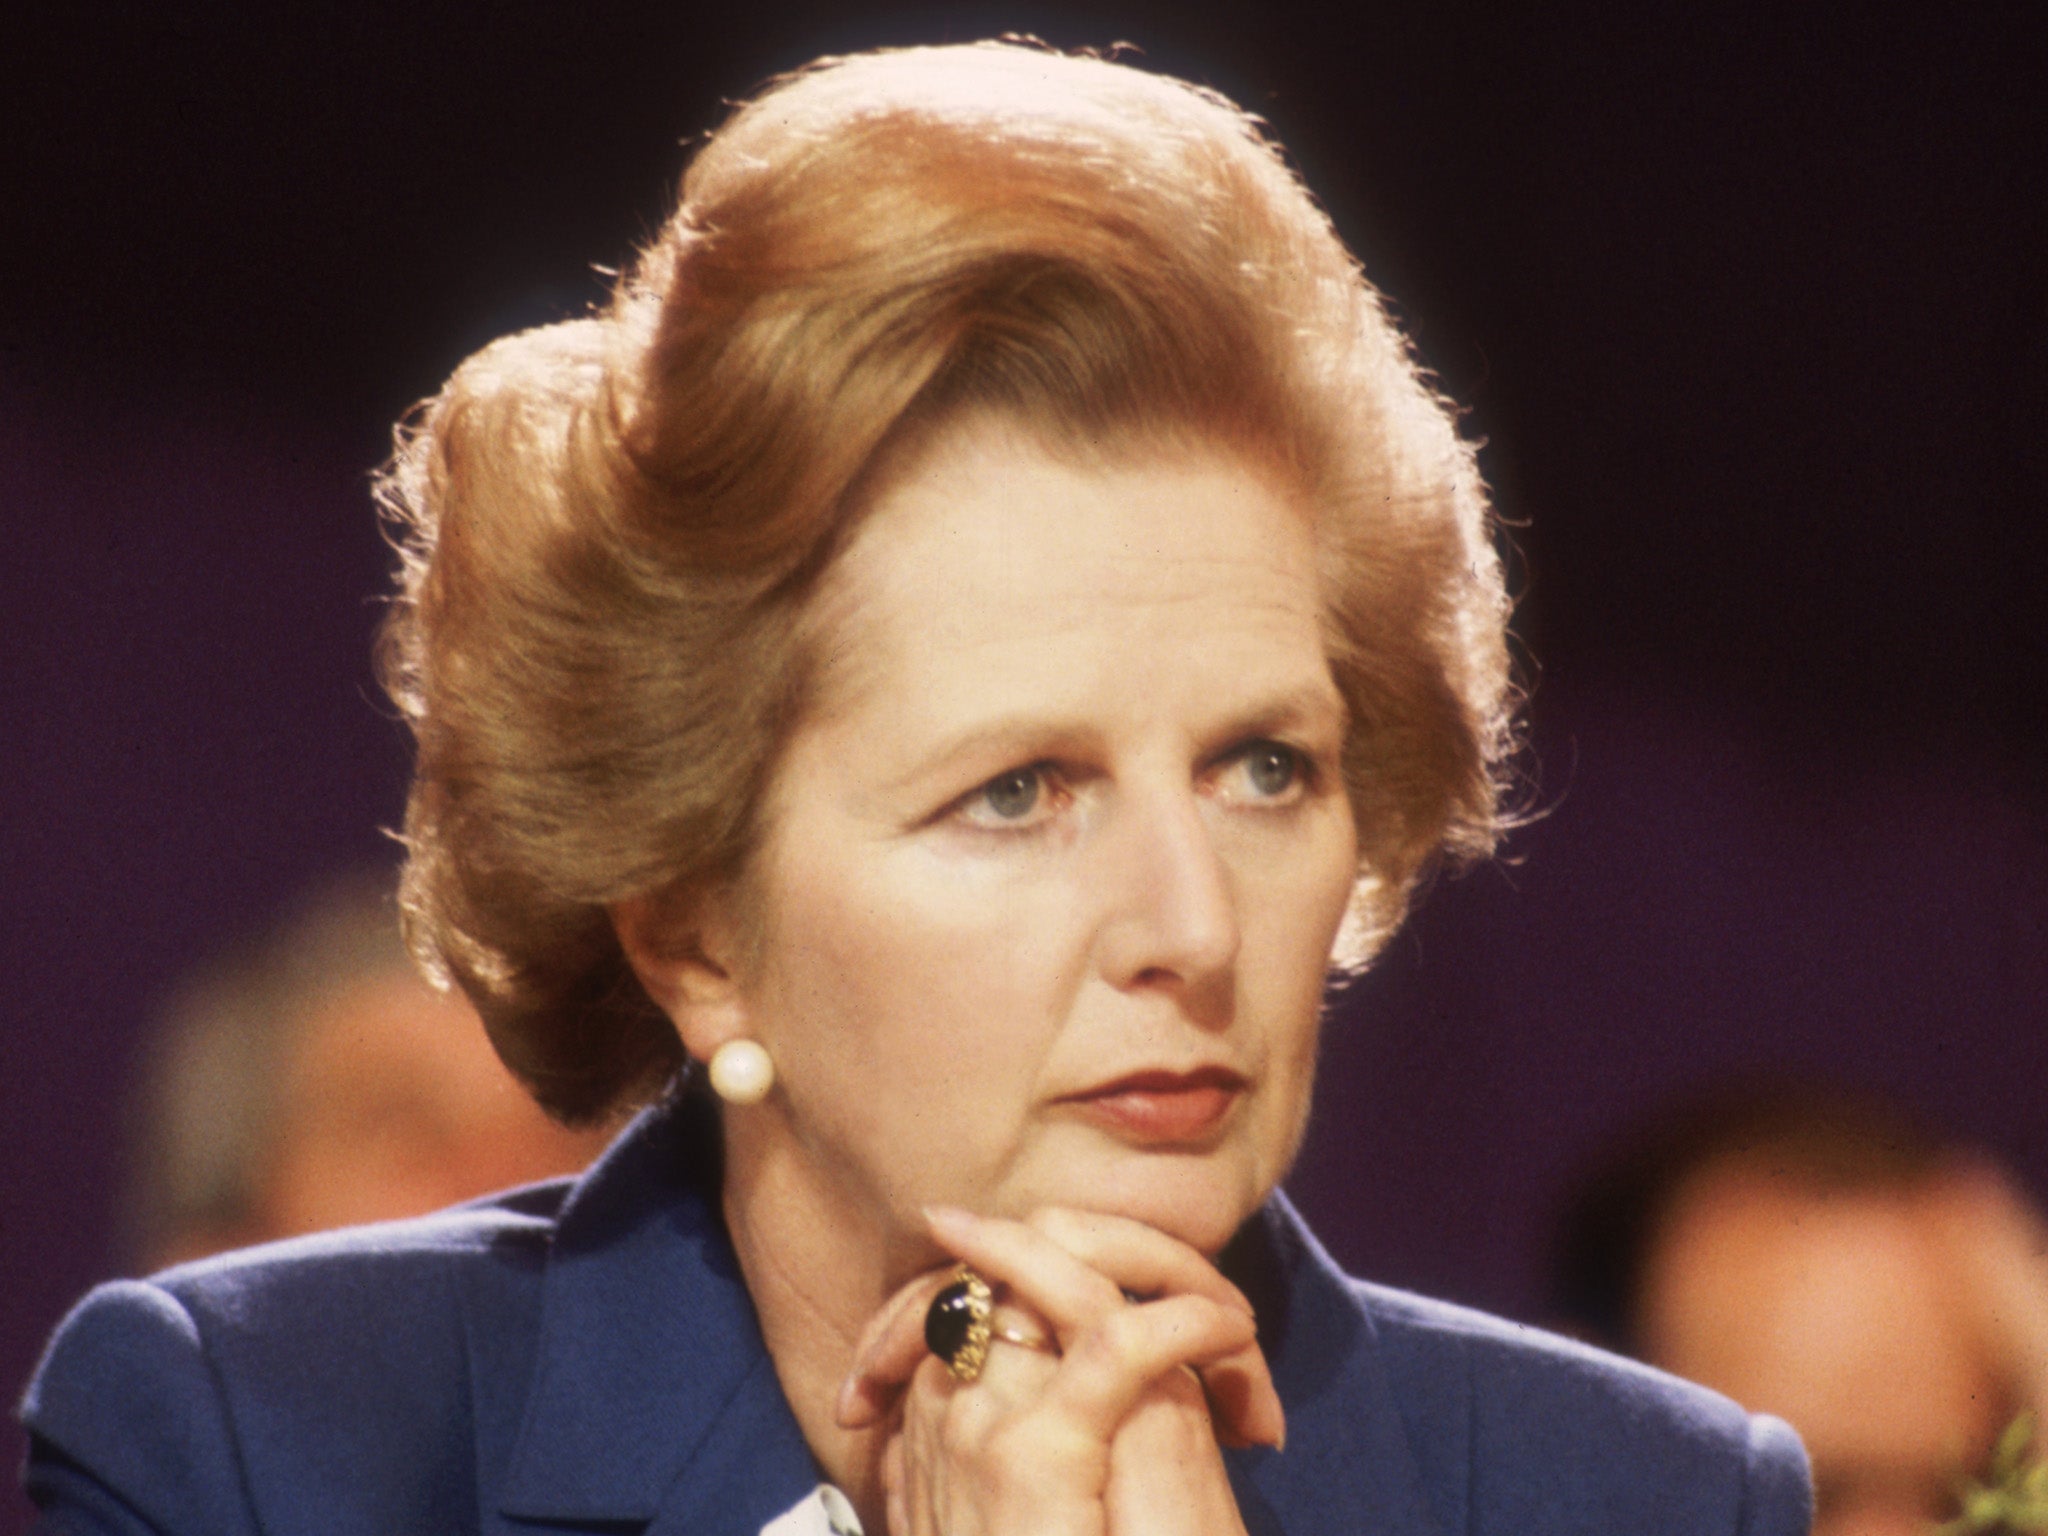 Margaret Thatcher sat down for interview with Kirsty Wark in 1990